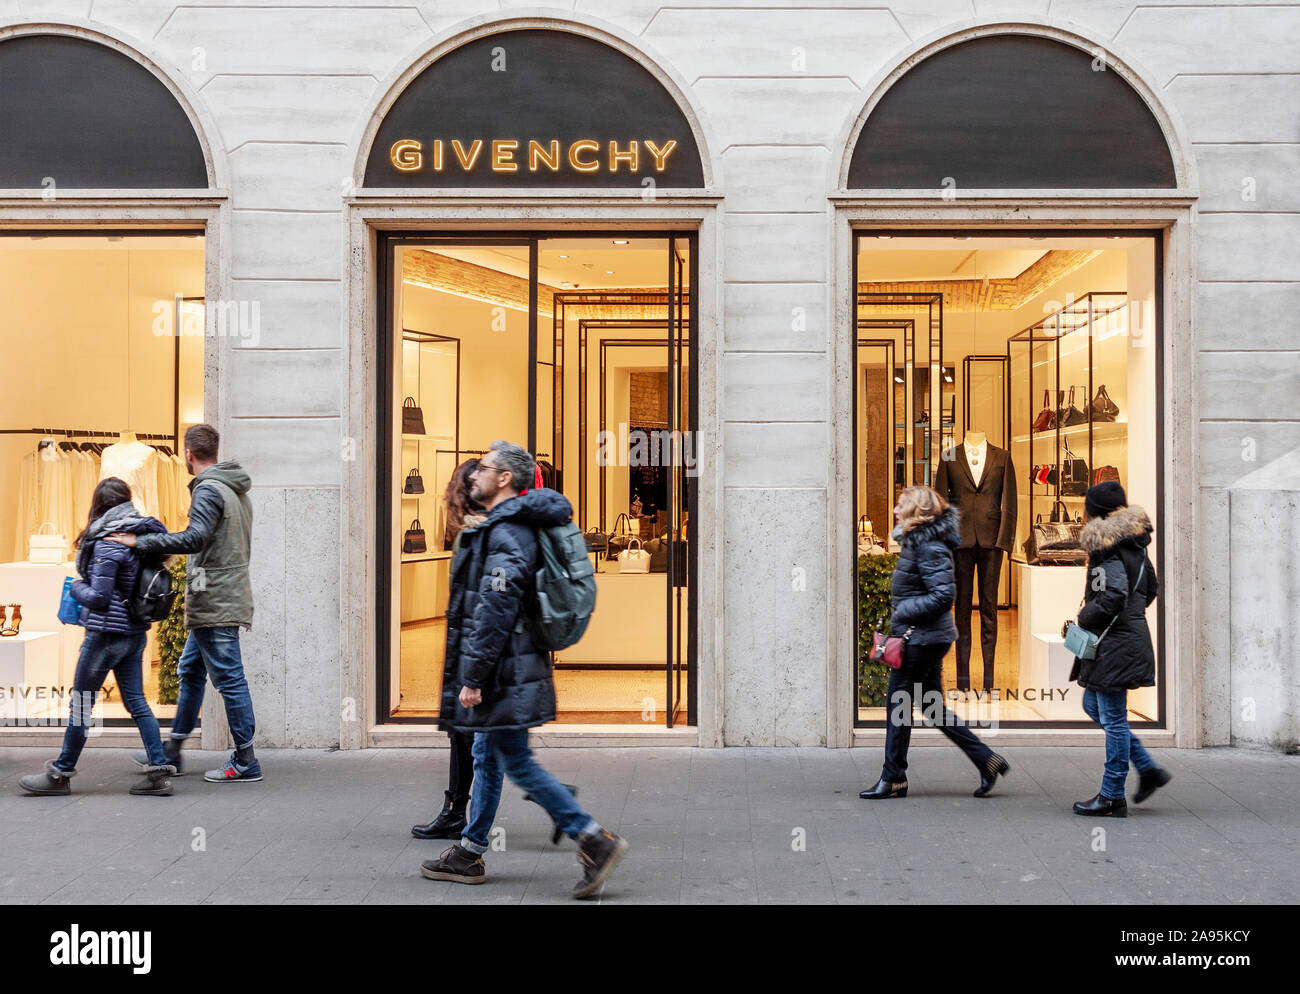 Street view of Givenchy luxury fashion 